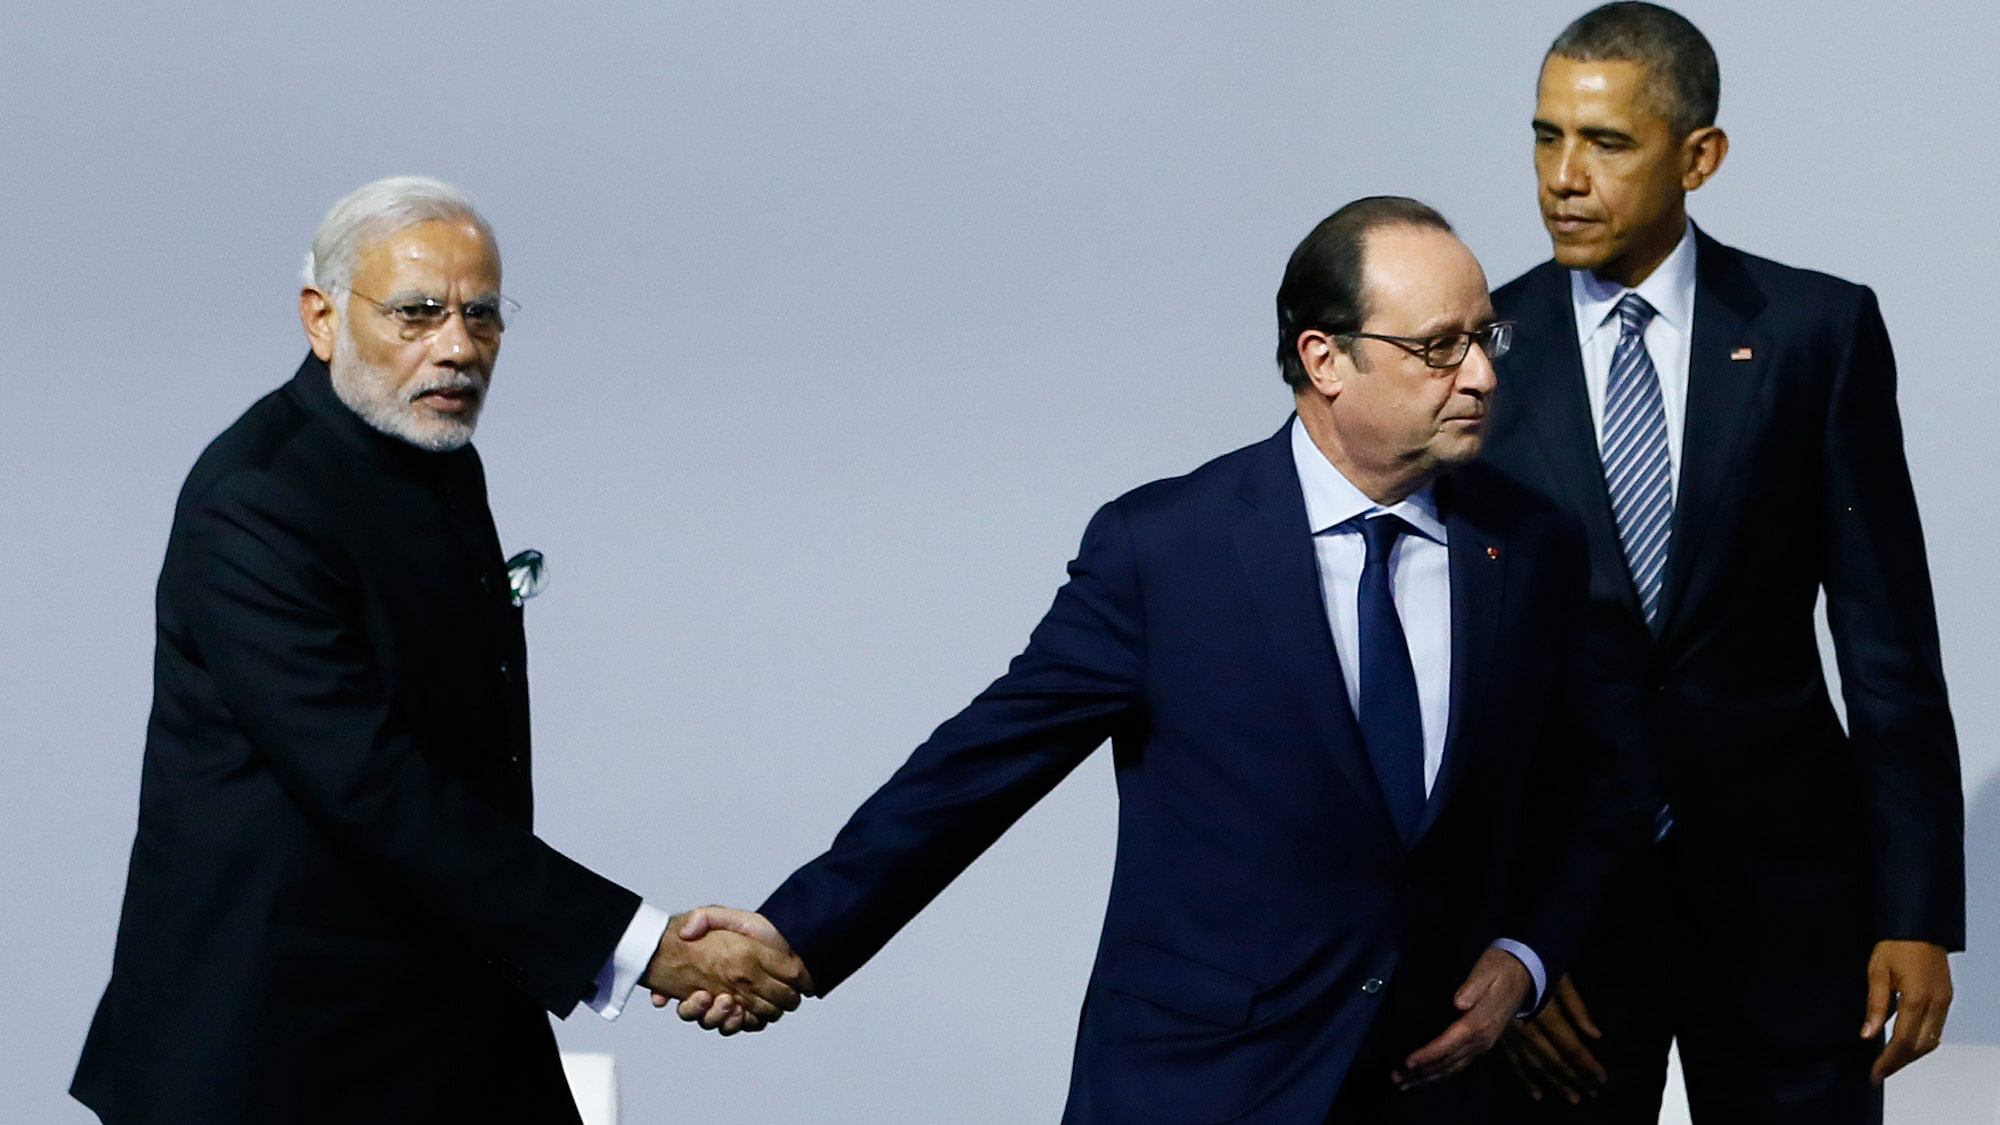 French President Francois Hollande, center, shakes hands with  PM Narendra Modi, left, as US President Barack Obama leaves the ‘Mission Innovation: Accelerating the Clean Energy Revolution’ meeting at the COP2, UN Climate Change Conference, in Paris, Monday, Nov 30 2015. (Photo: AP)